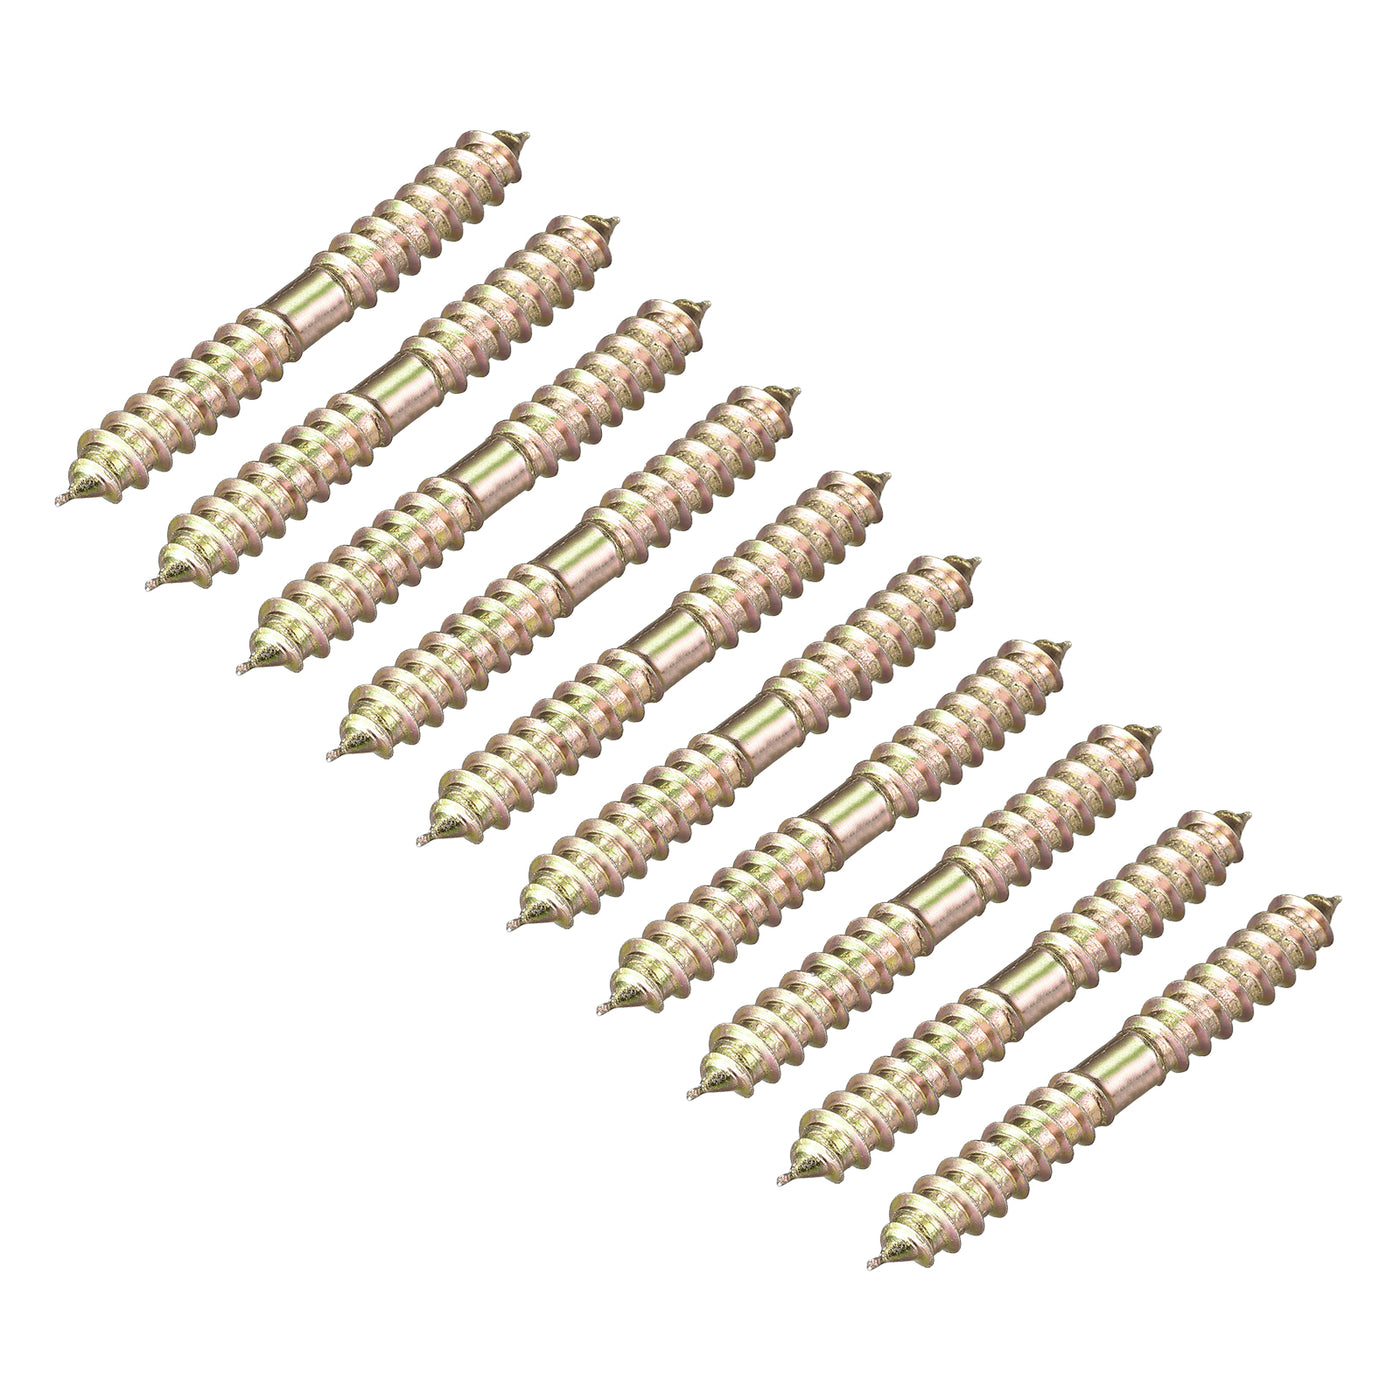 Uxcell Uxcell 5x13mm Hanger Bolts, 48pcs Double Ended Self-Tapping Thread Dowel Screws